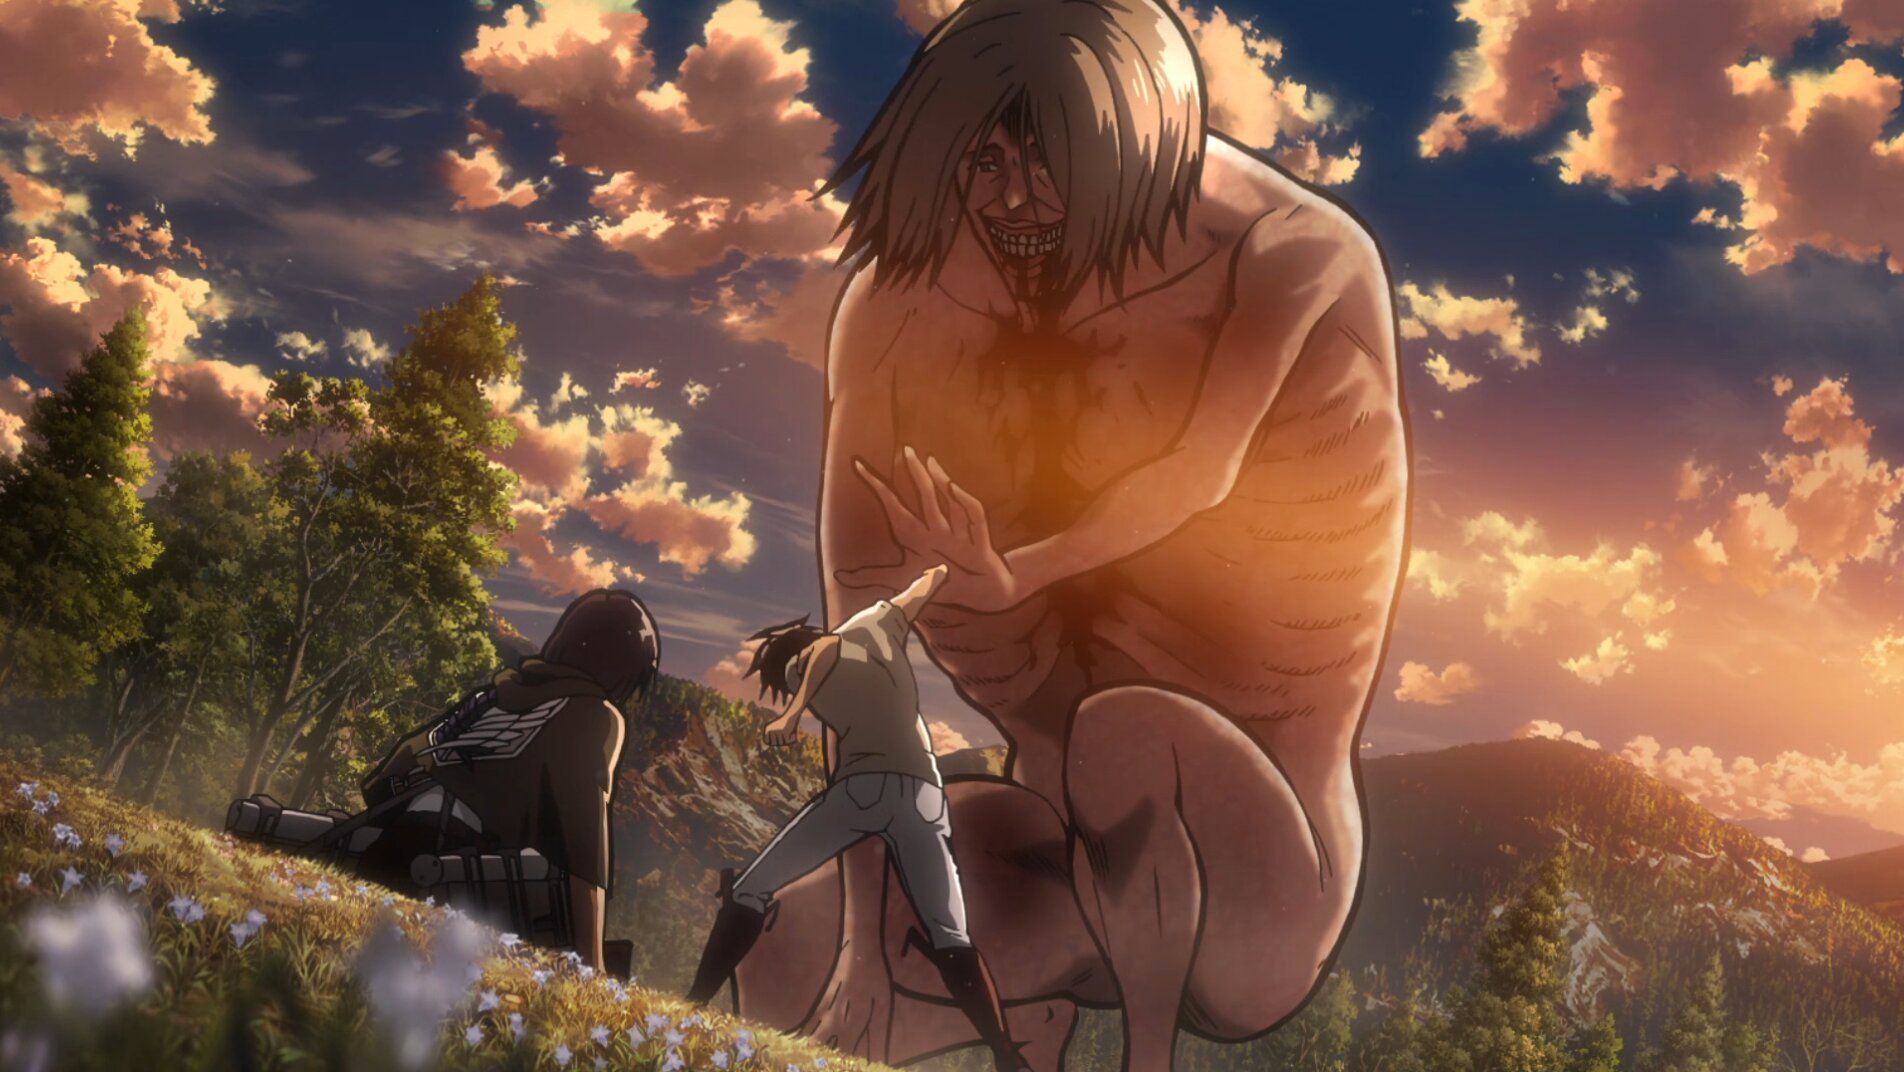 Eren triggers the coordinate by punching the outstretched hand of the Smiling Titan